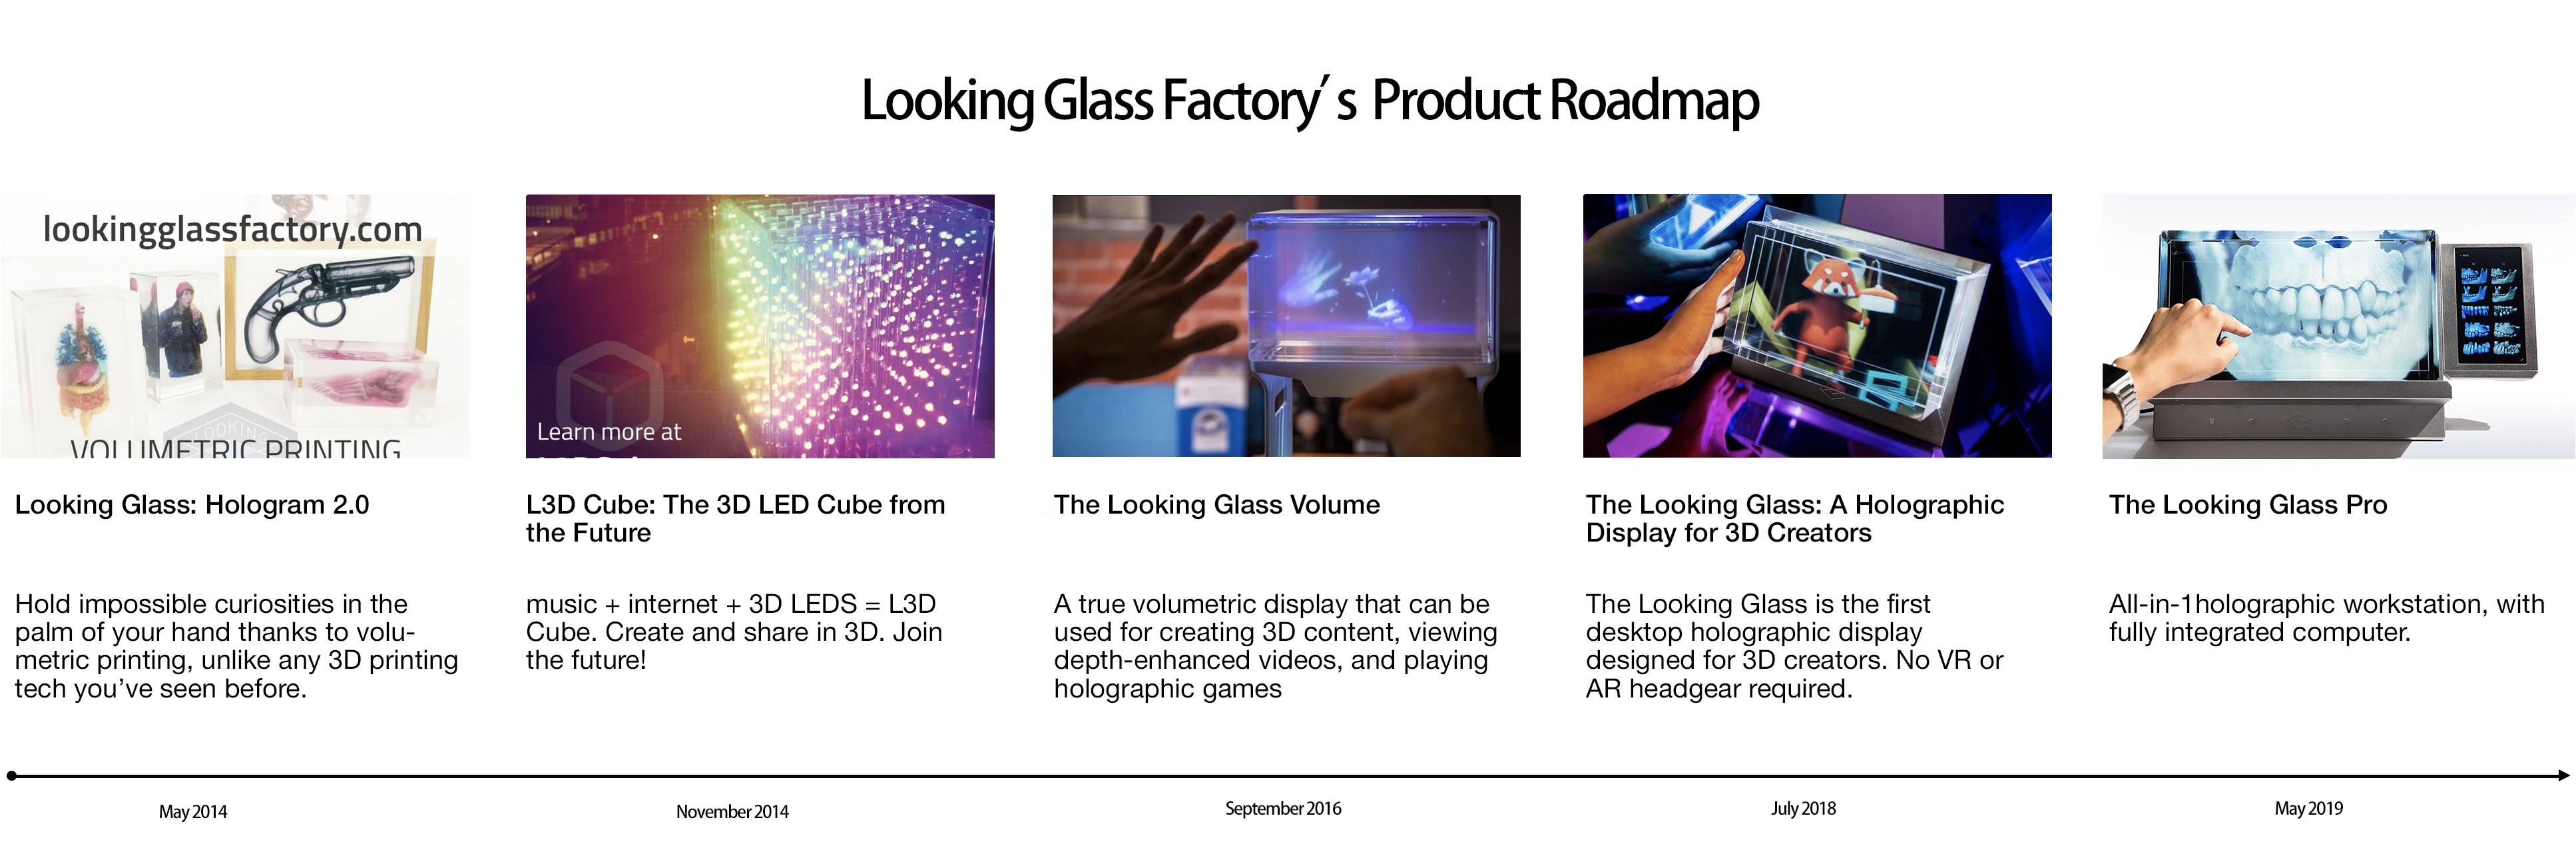 Looking glass product roadmap